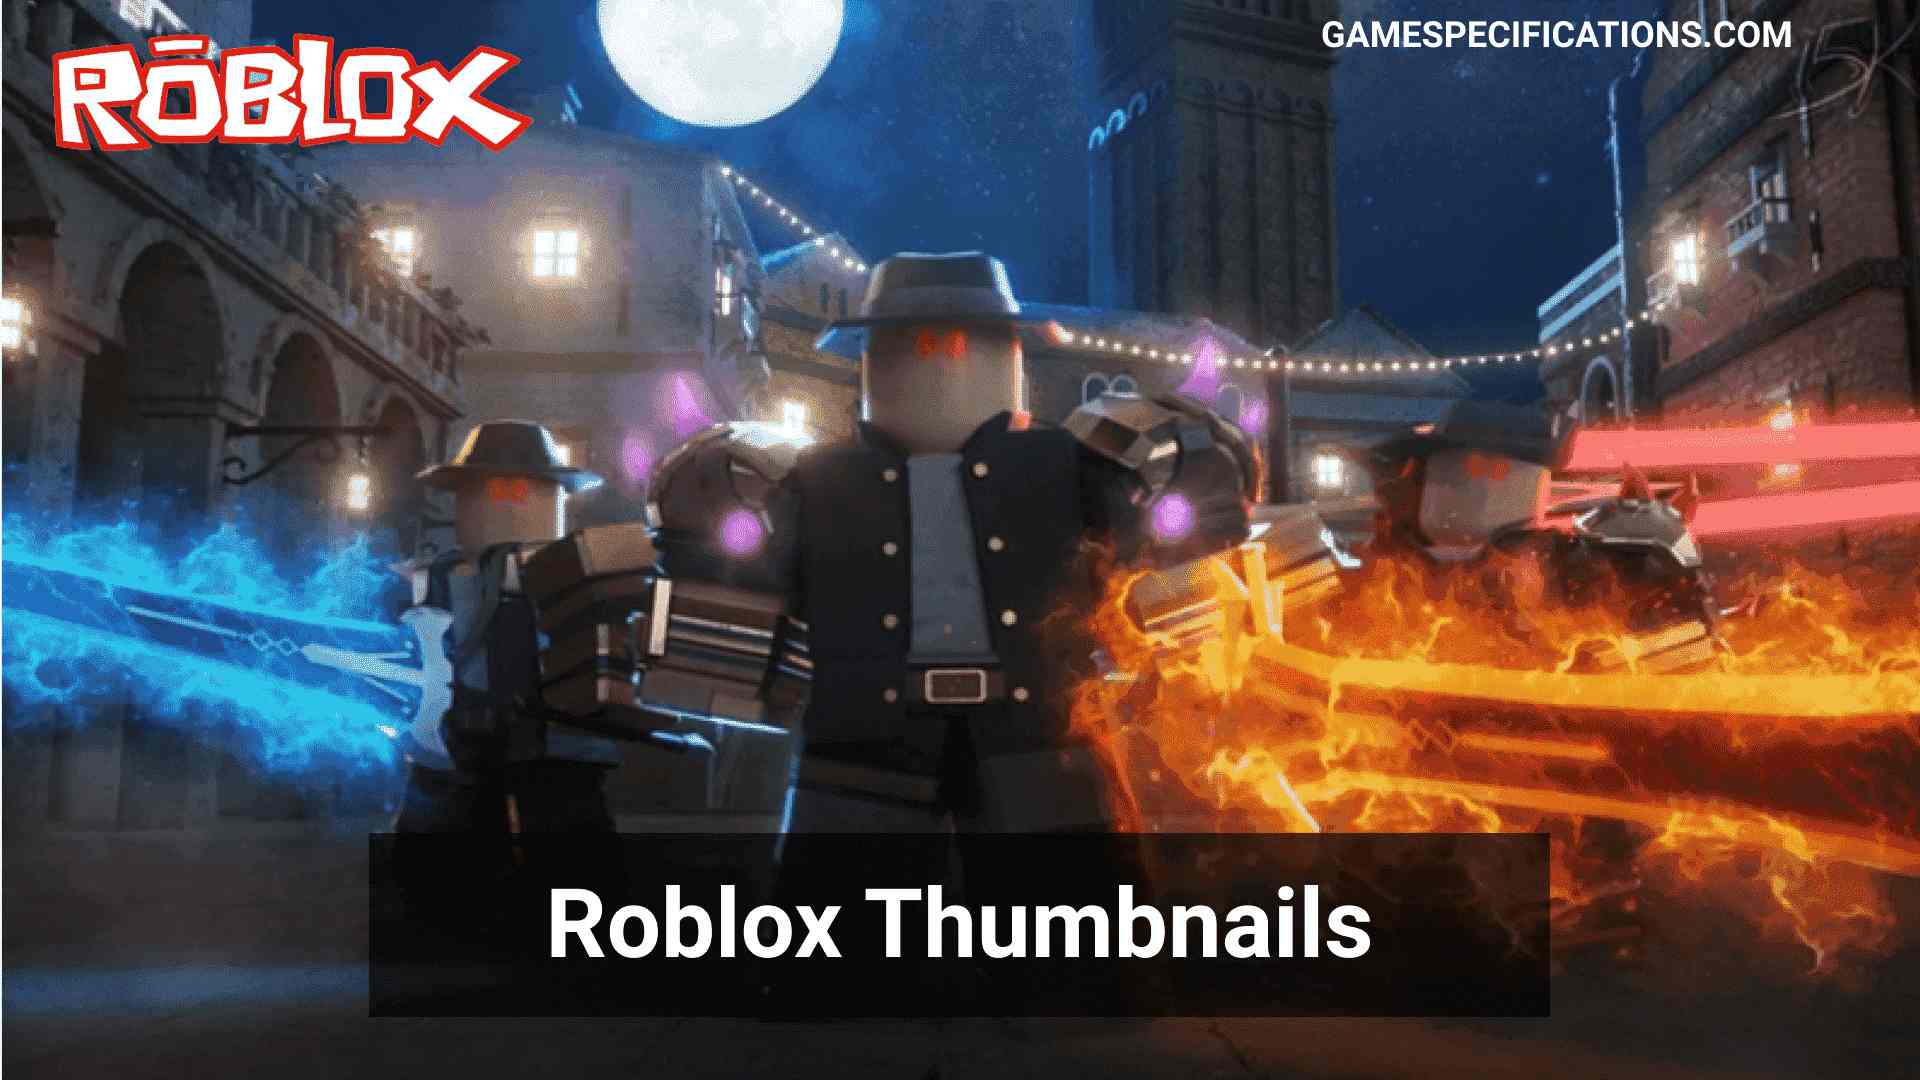 Roblox Thumbnails An Ultimate Guide On Awesome Thumbnails Generation 2021 Game Specifications - how to change the roblox resolution in game